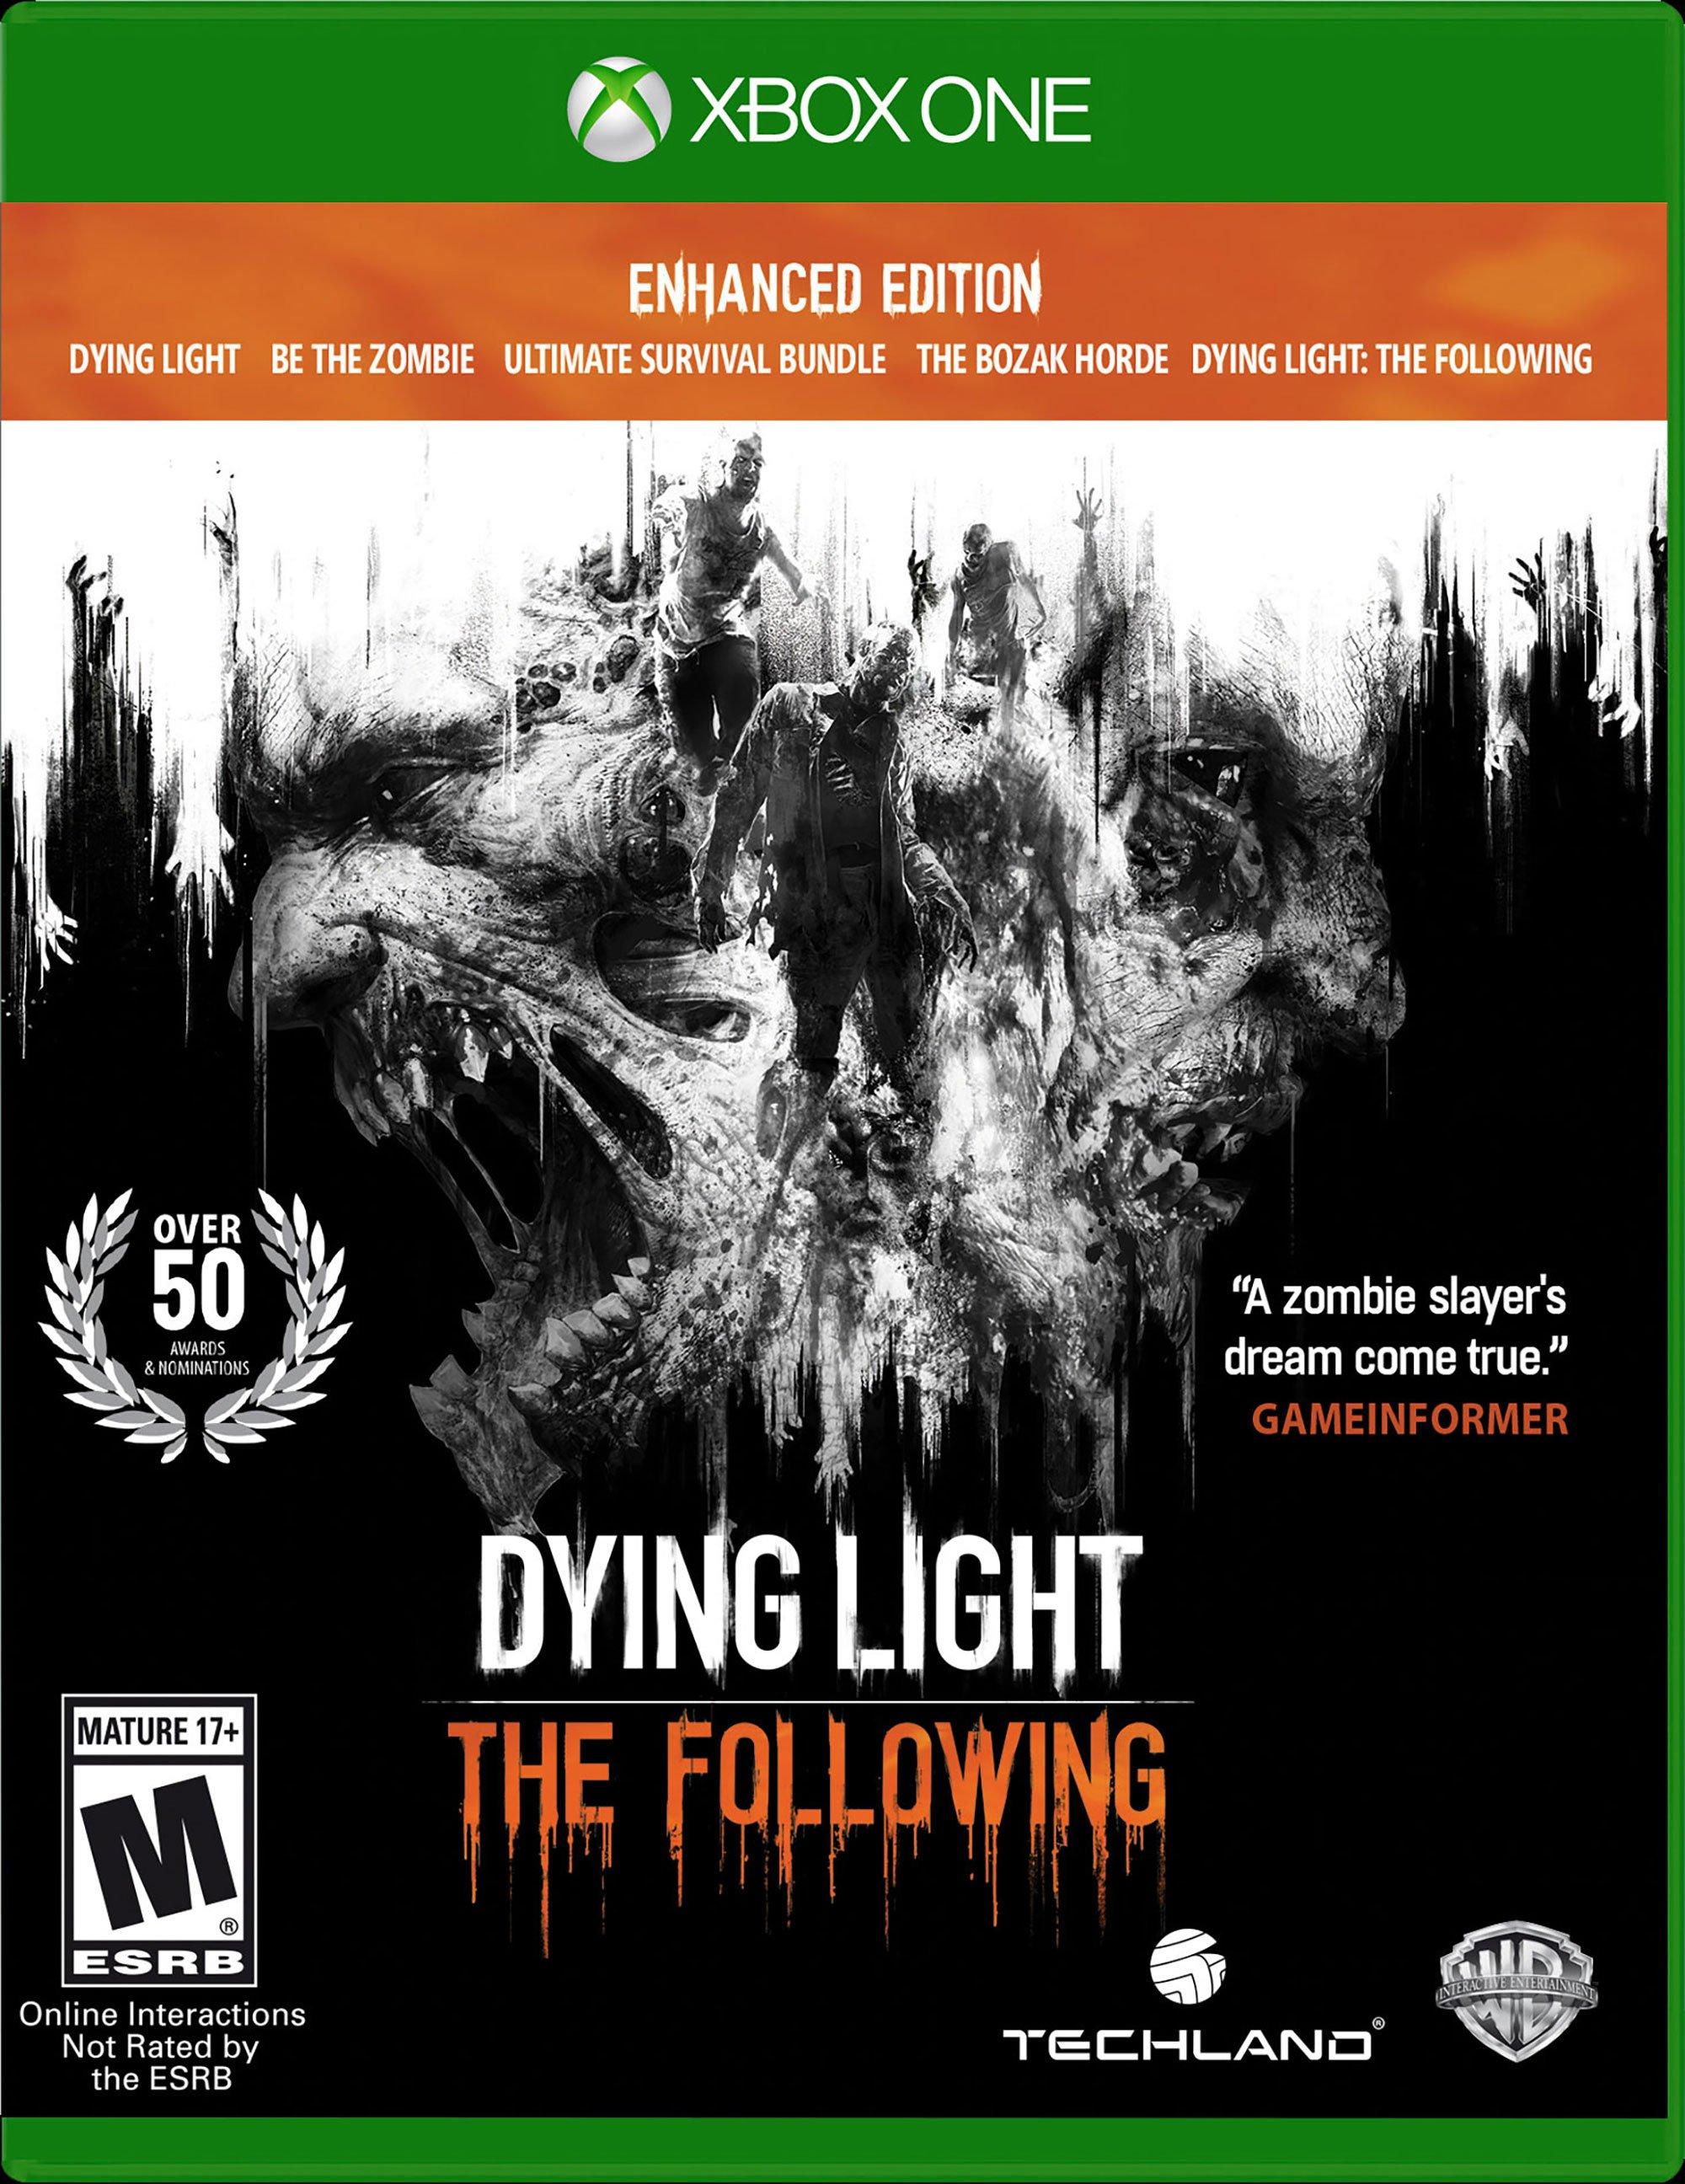 Dying Light the following all 6 mysterious boxes guide 